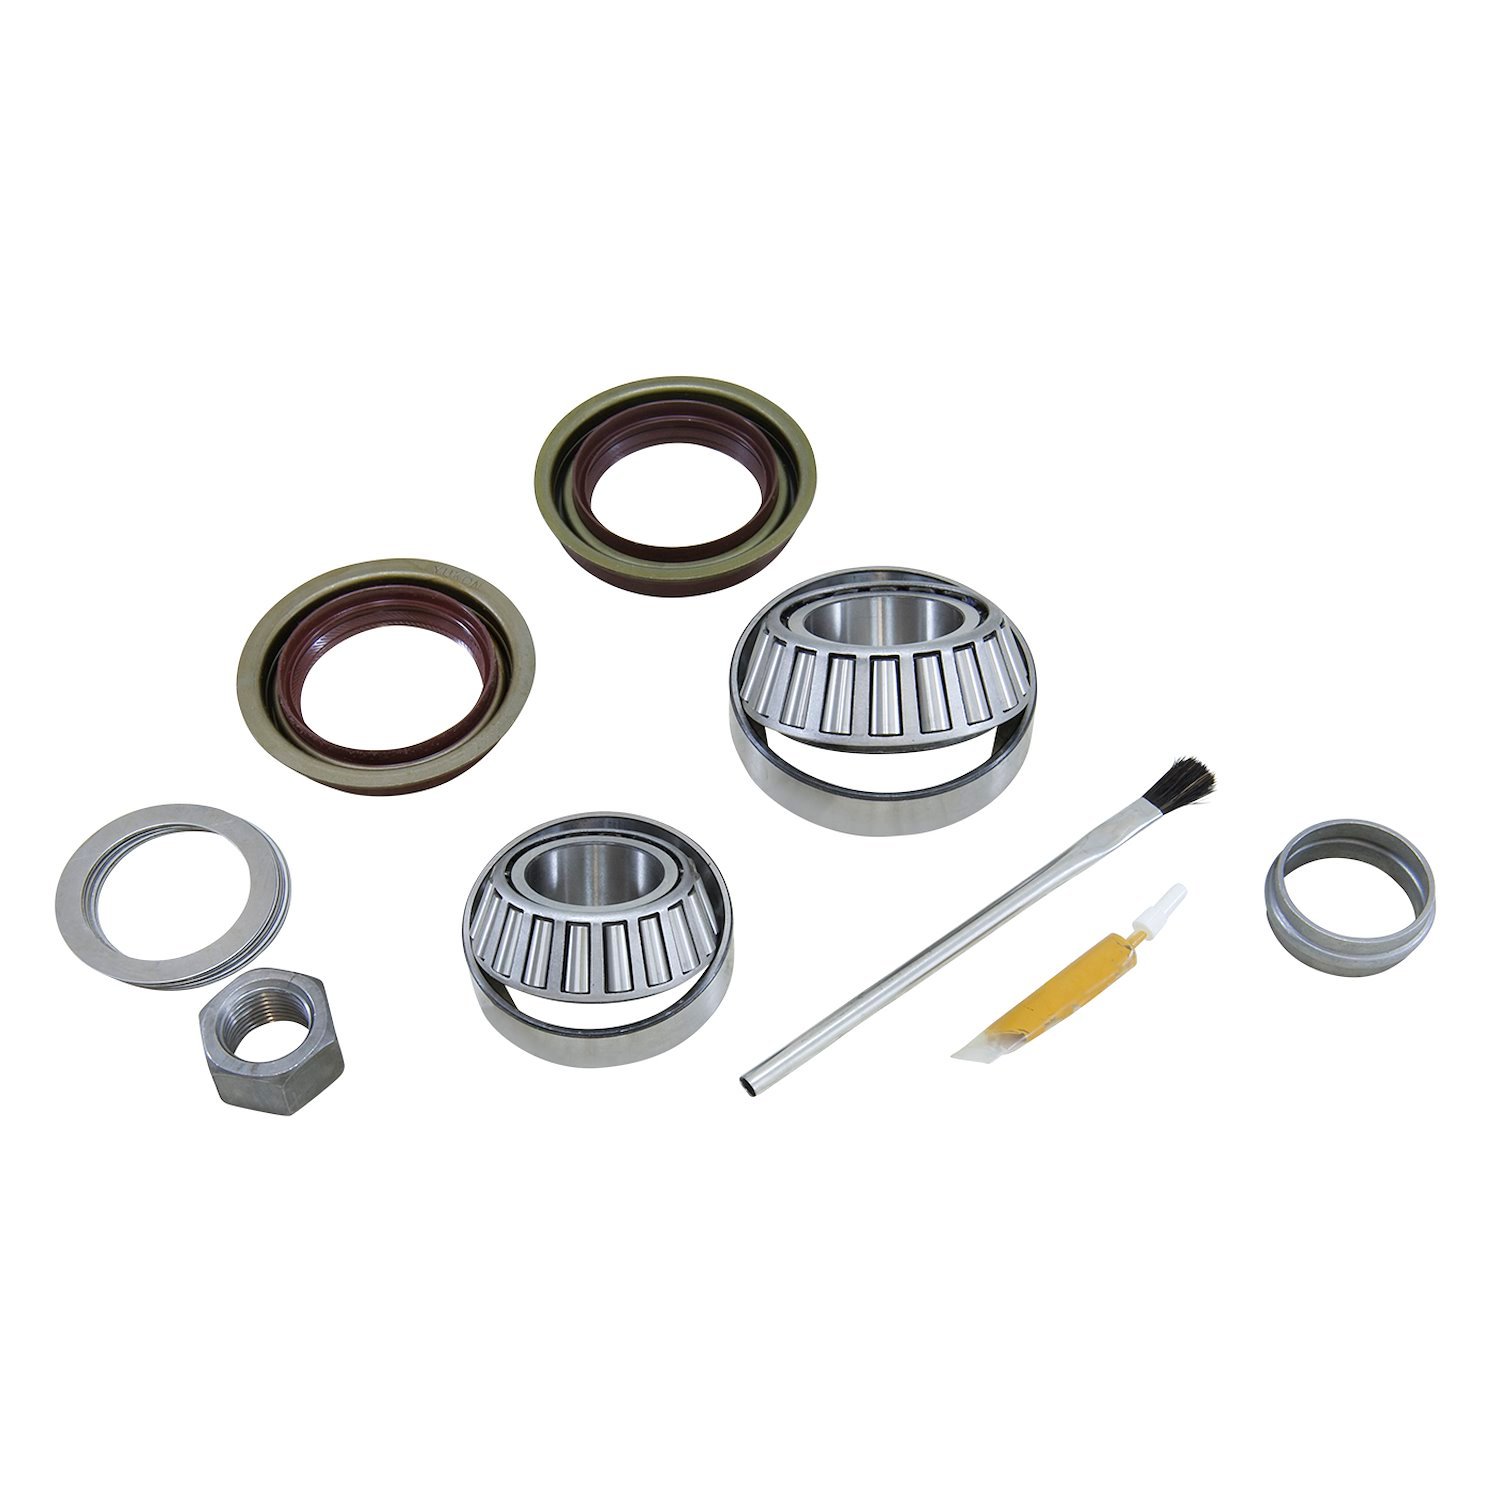 USA Standard 60006 Pinion Installation Kit, For Rubicon Jk 44 Front